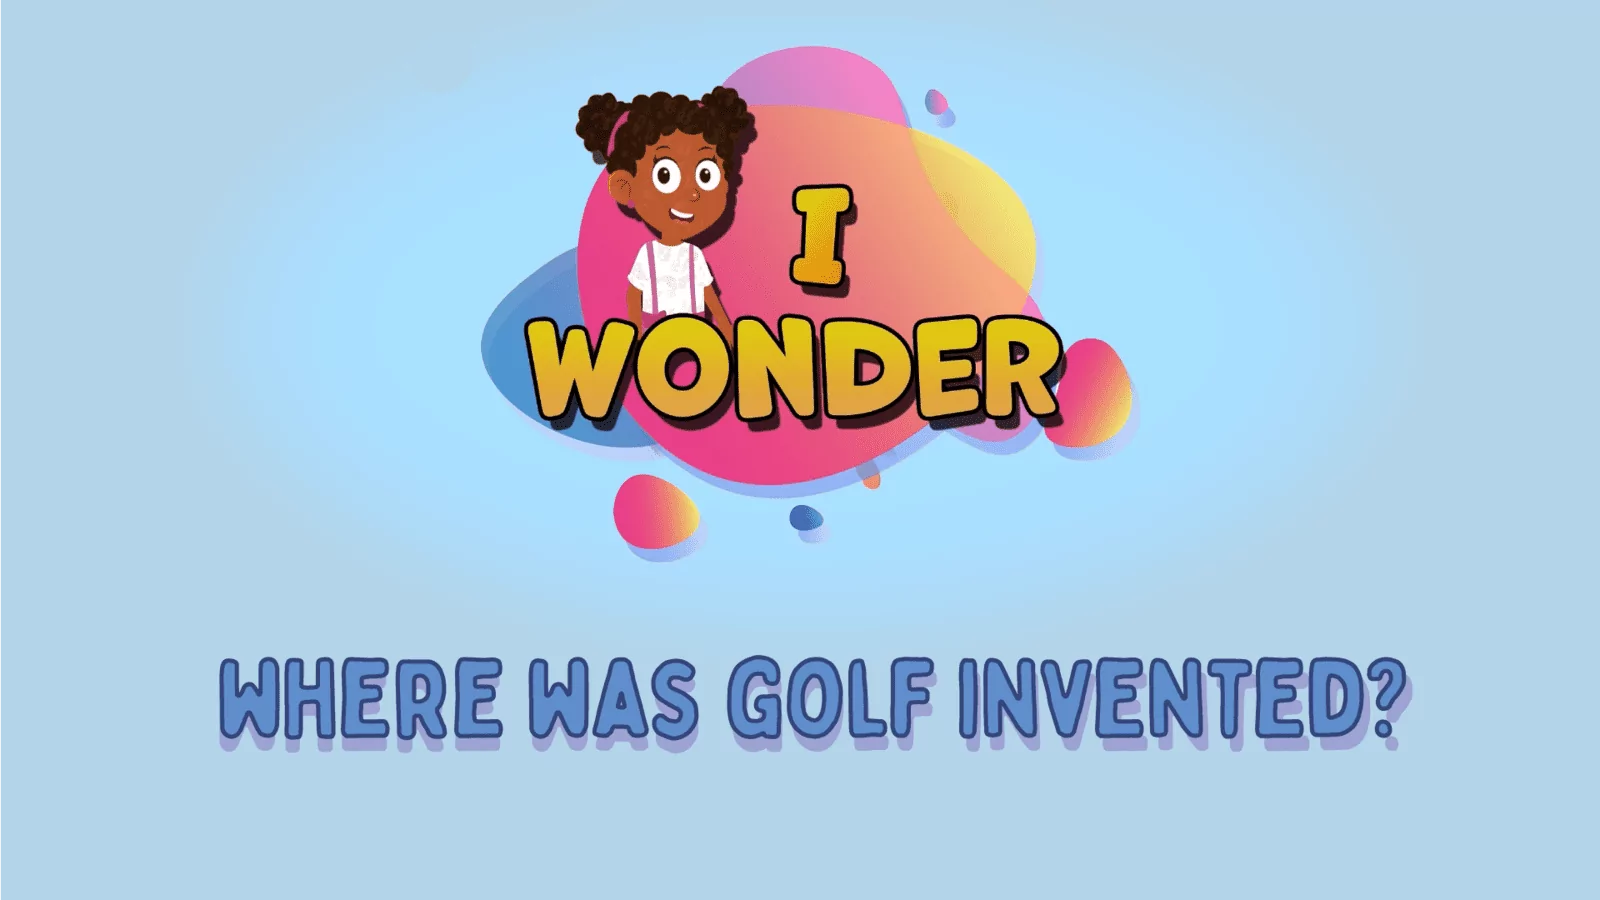 Where Was Golf Invented?